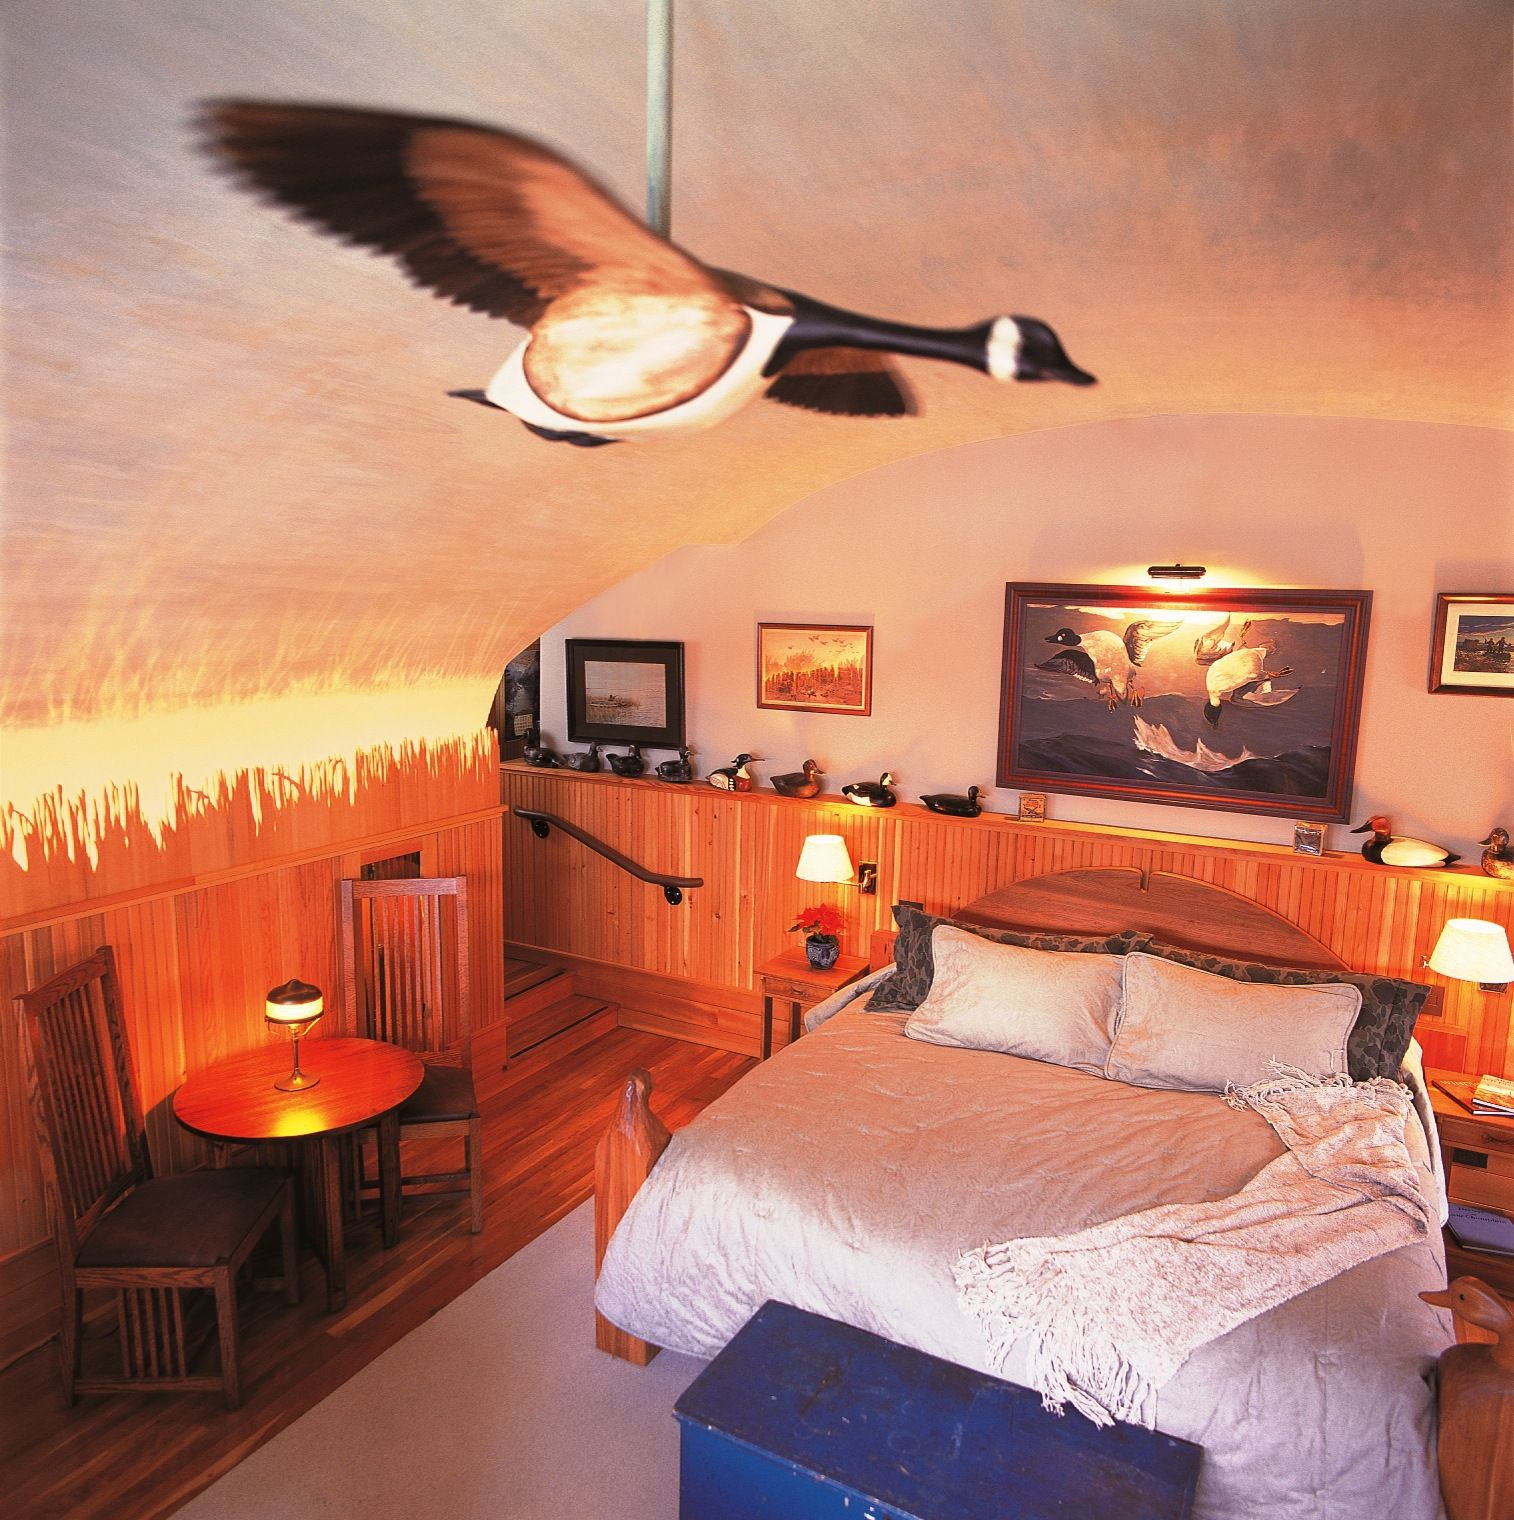 Hunting Bedroom Decor
 The Mallard Room plete with duck blinds and calls